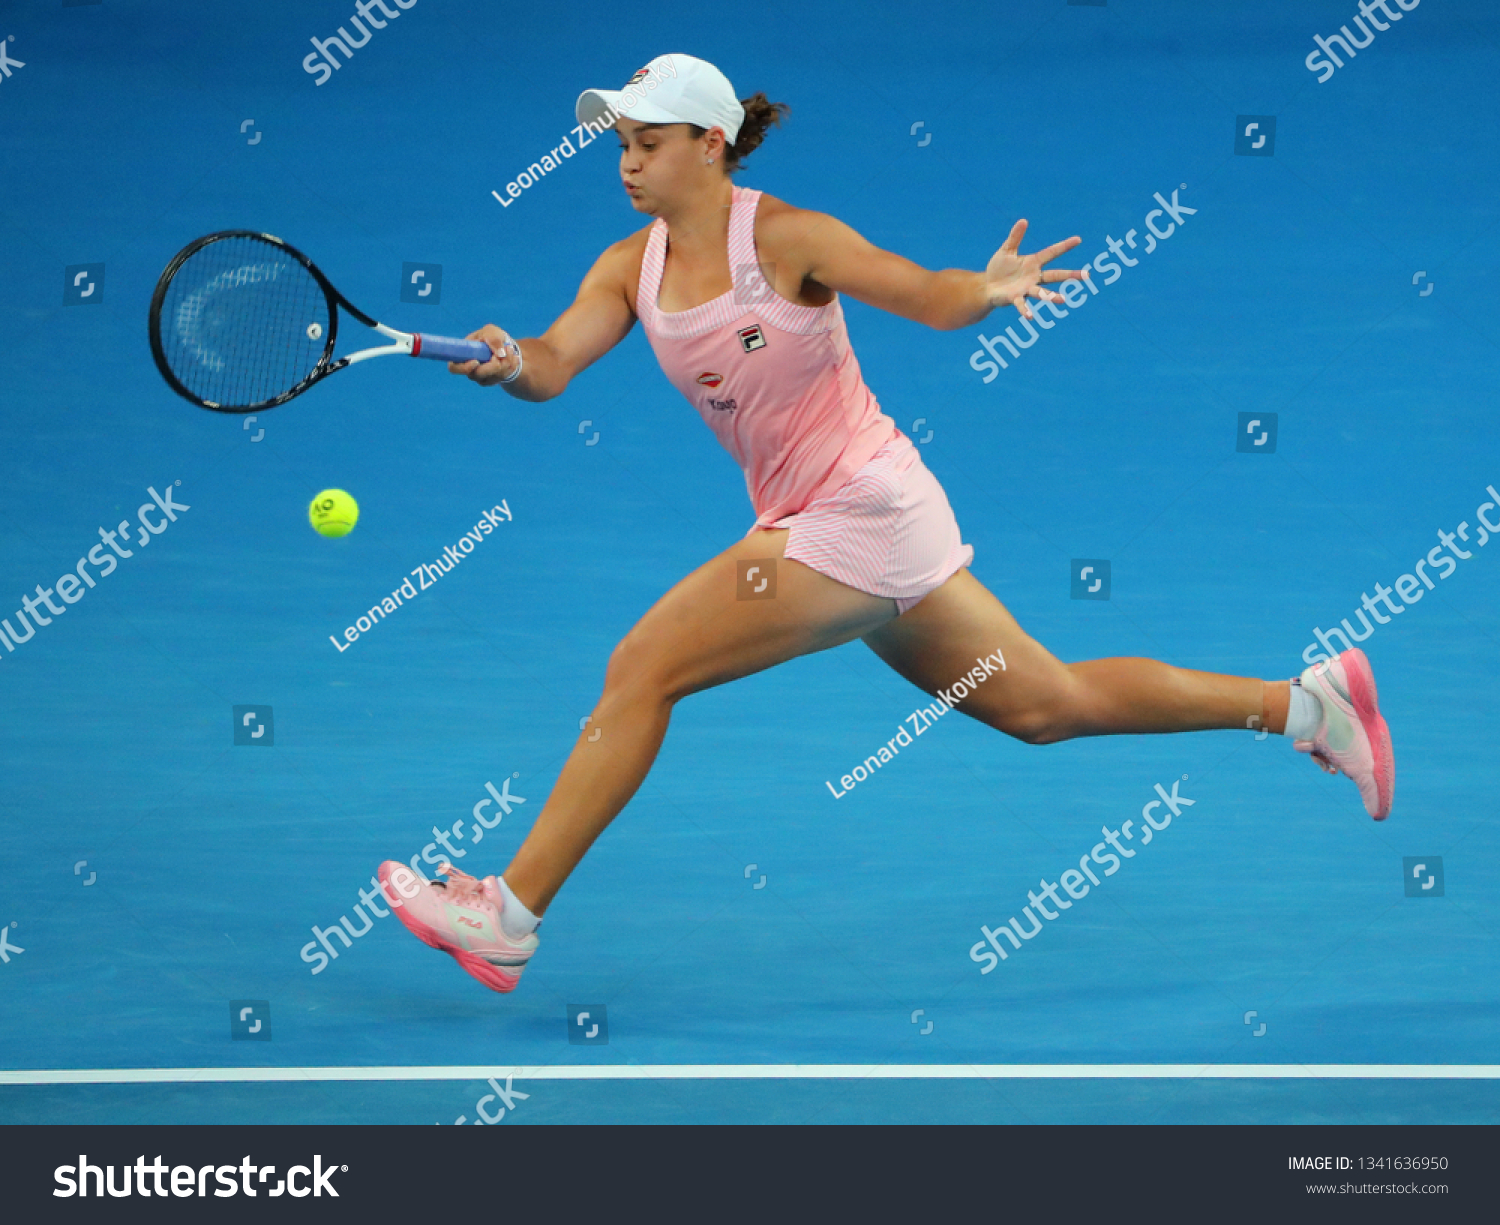 ashleigh barty parents Pic